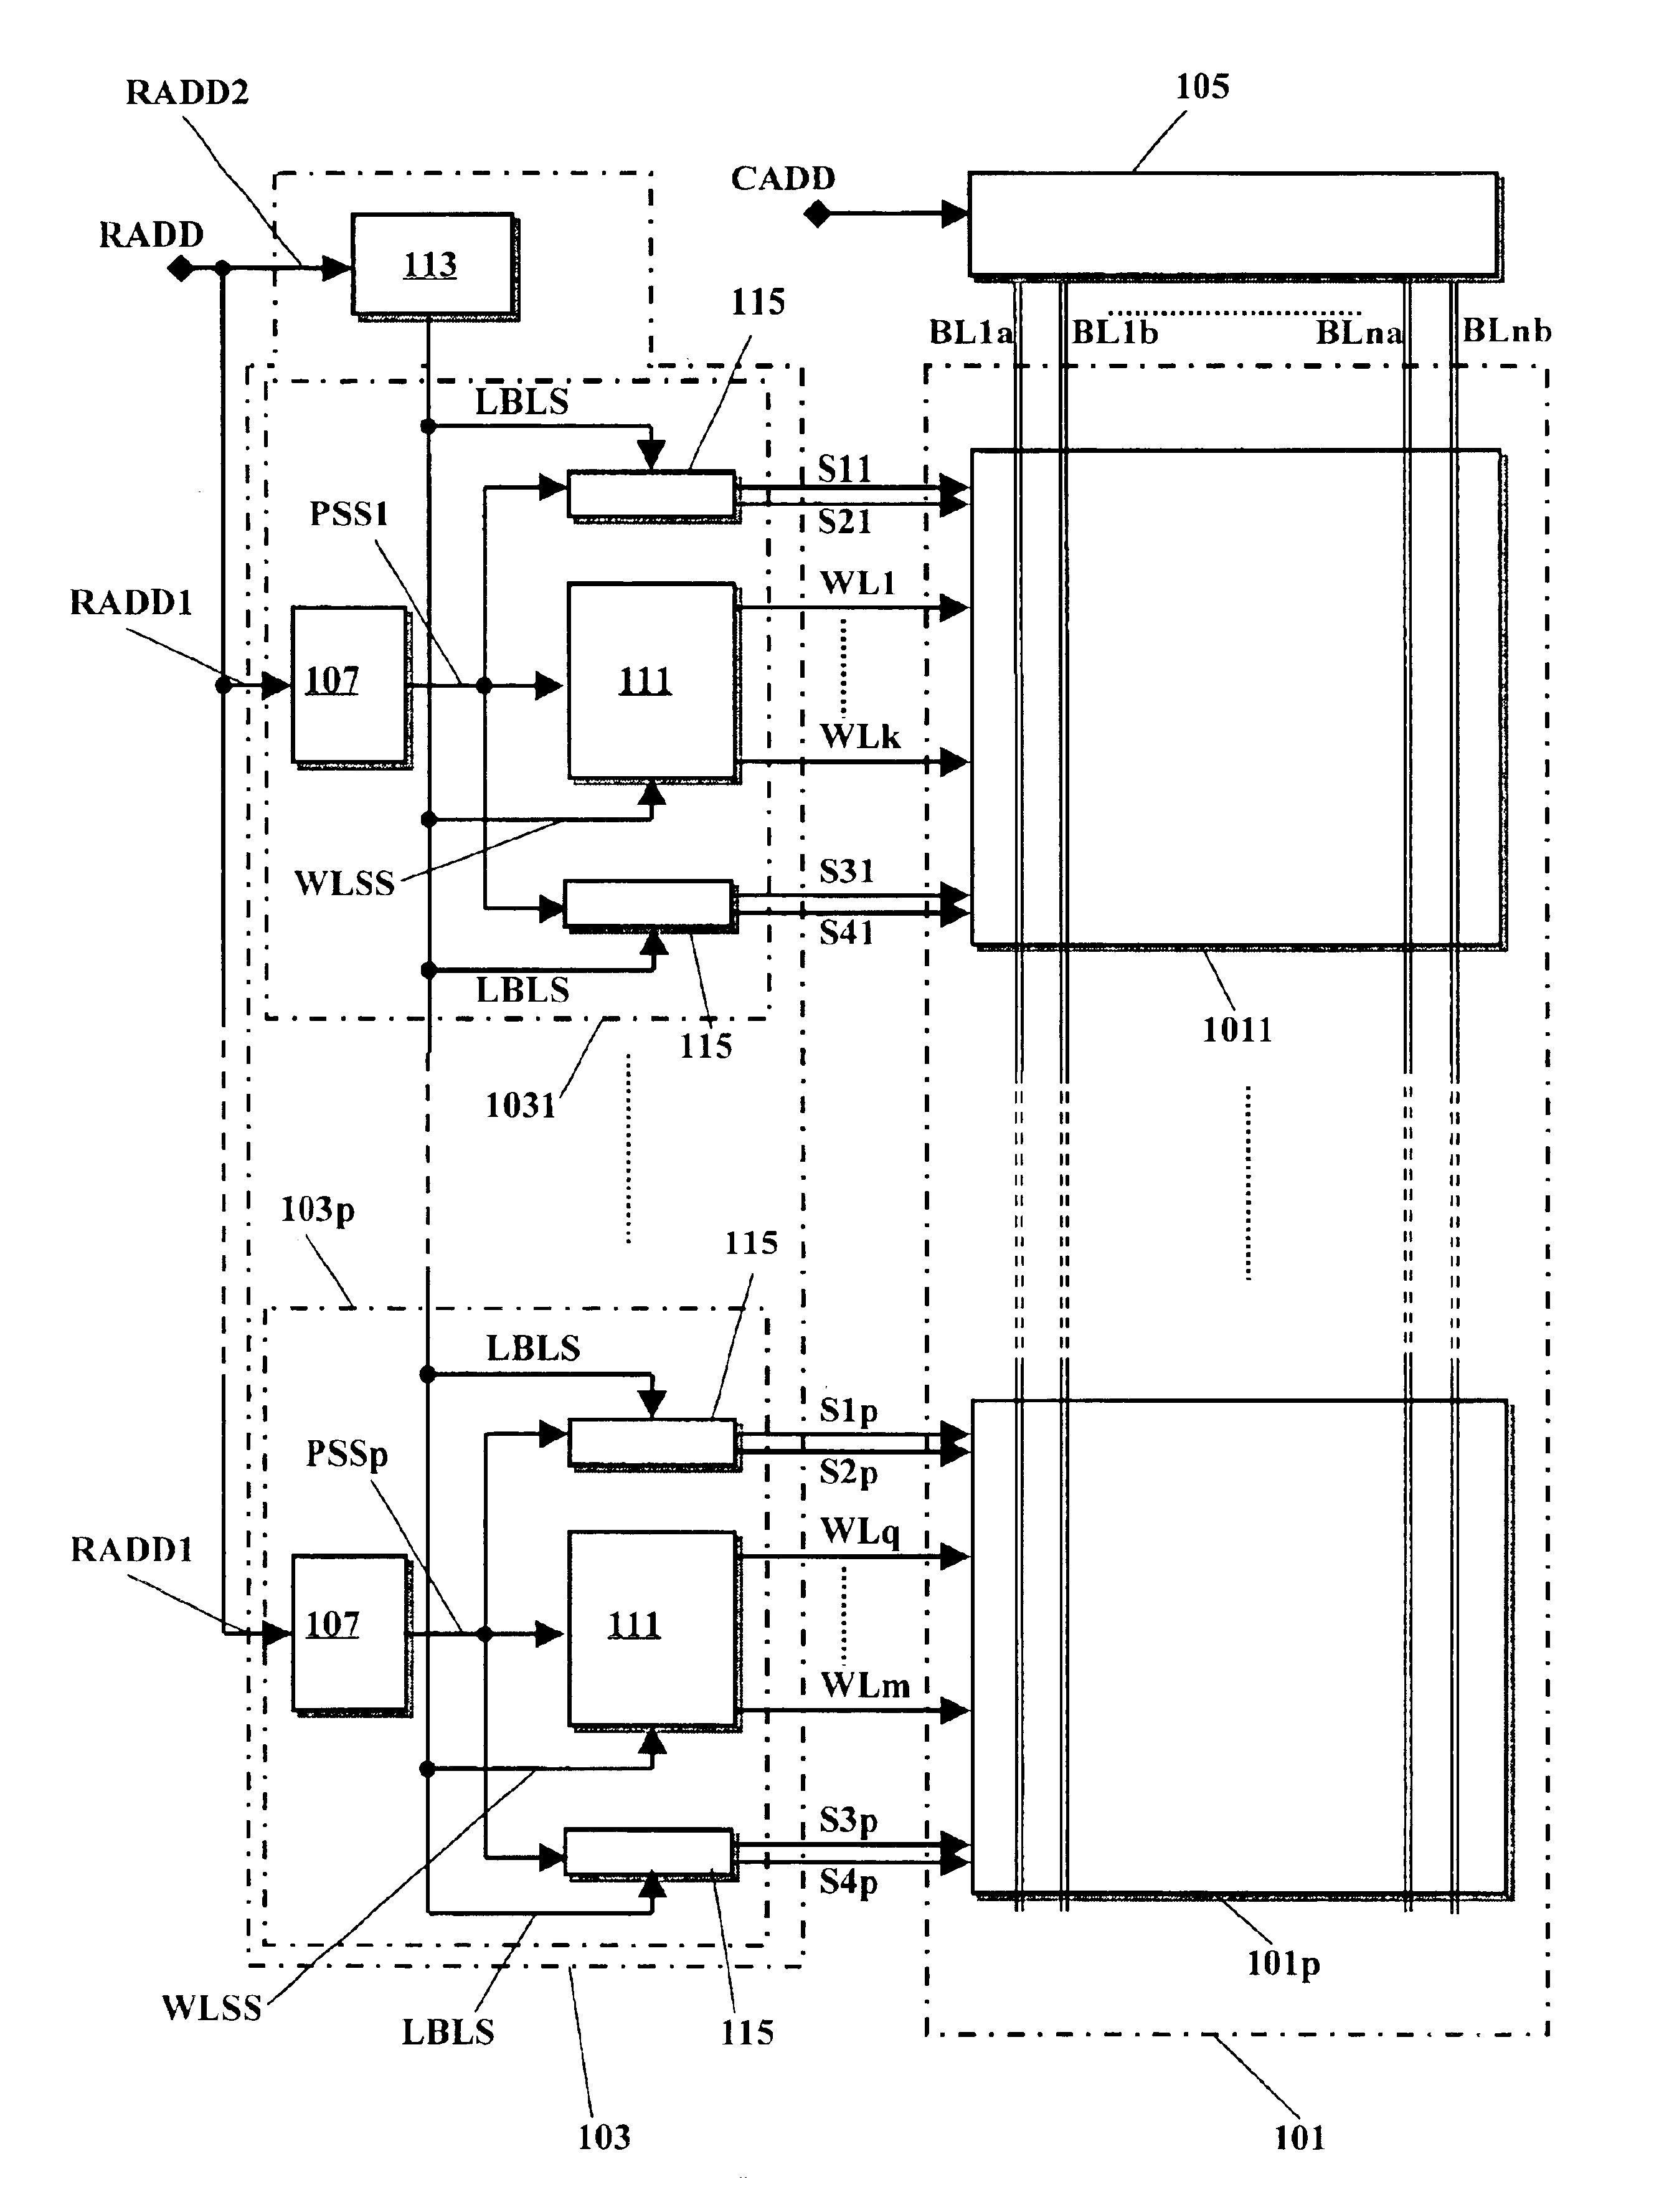 Line selector for a matrix of memory elements